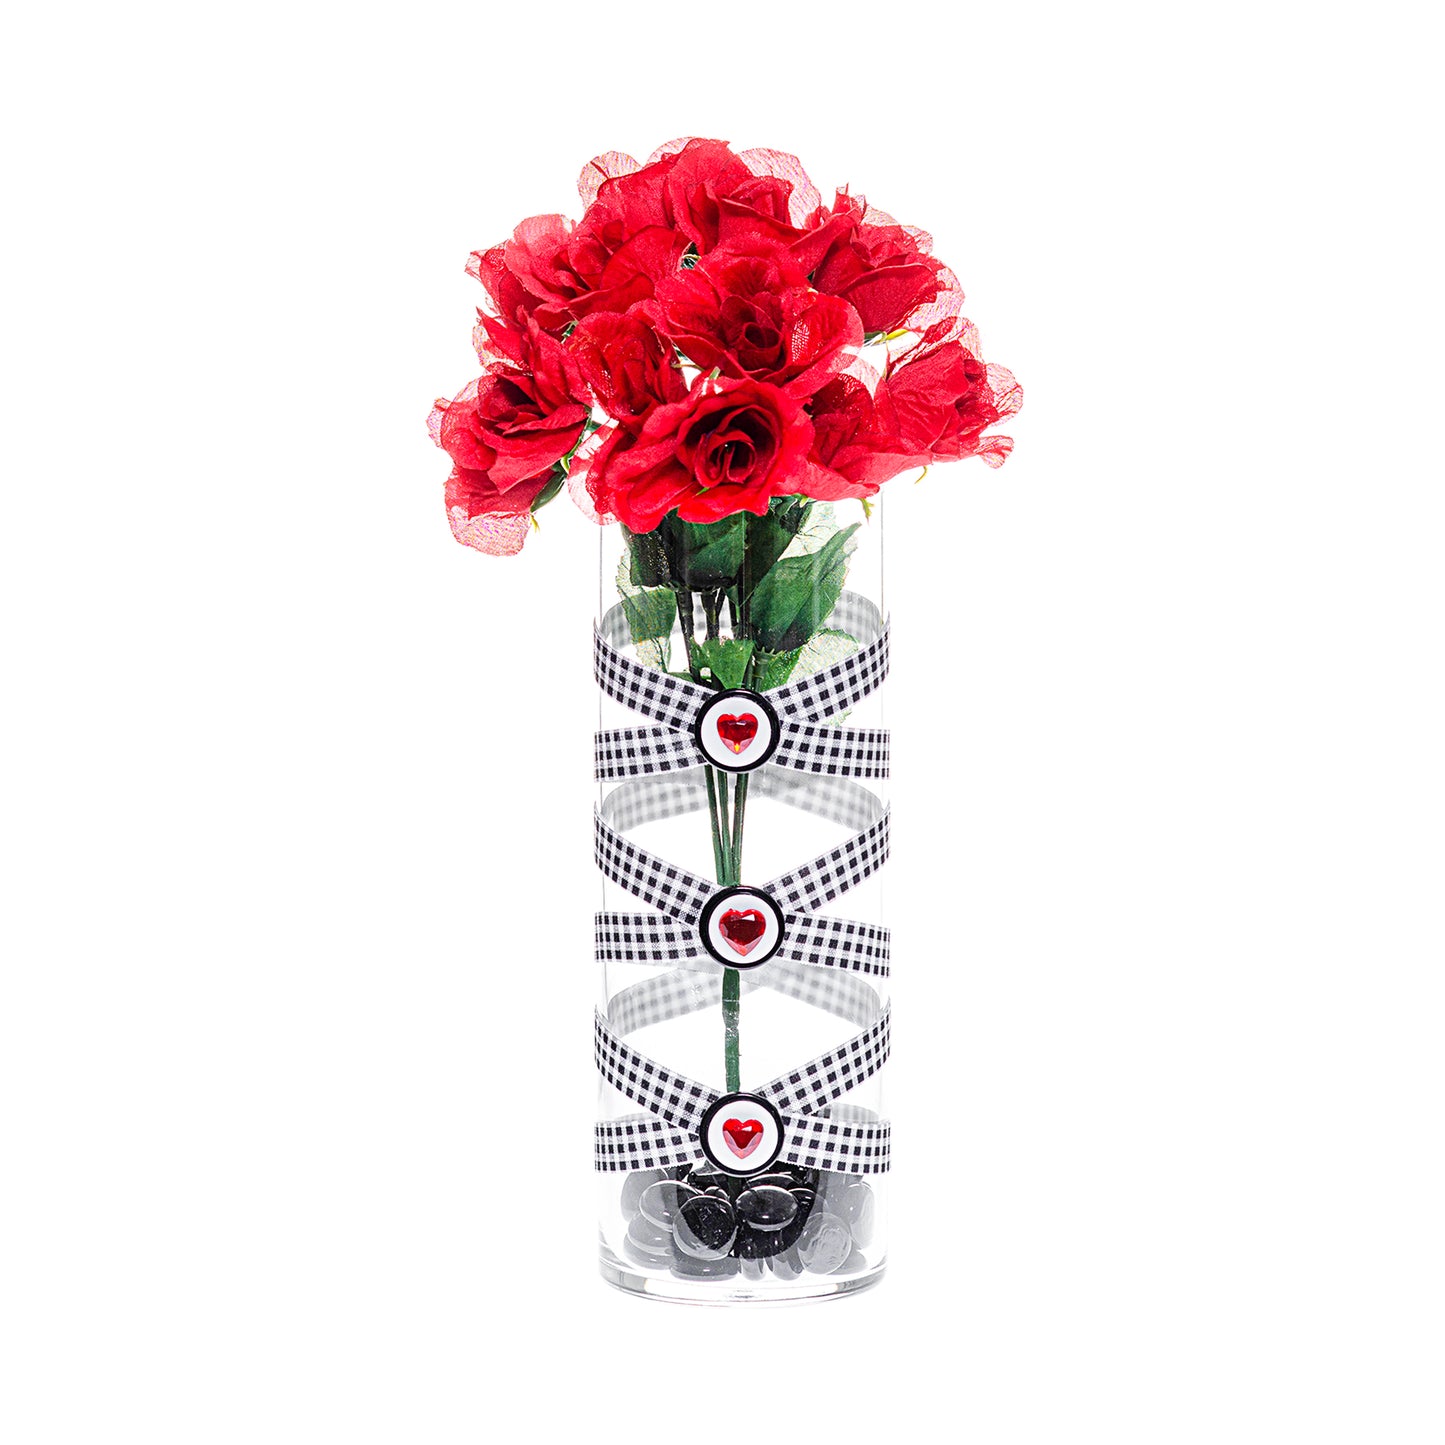 Front of Glass Wrappings' 10" bud vase wrapped in black & white check elastic, decorated with black and white buttons and 3 red gem hearts. Filled with red roses.